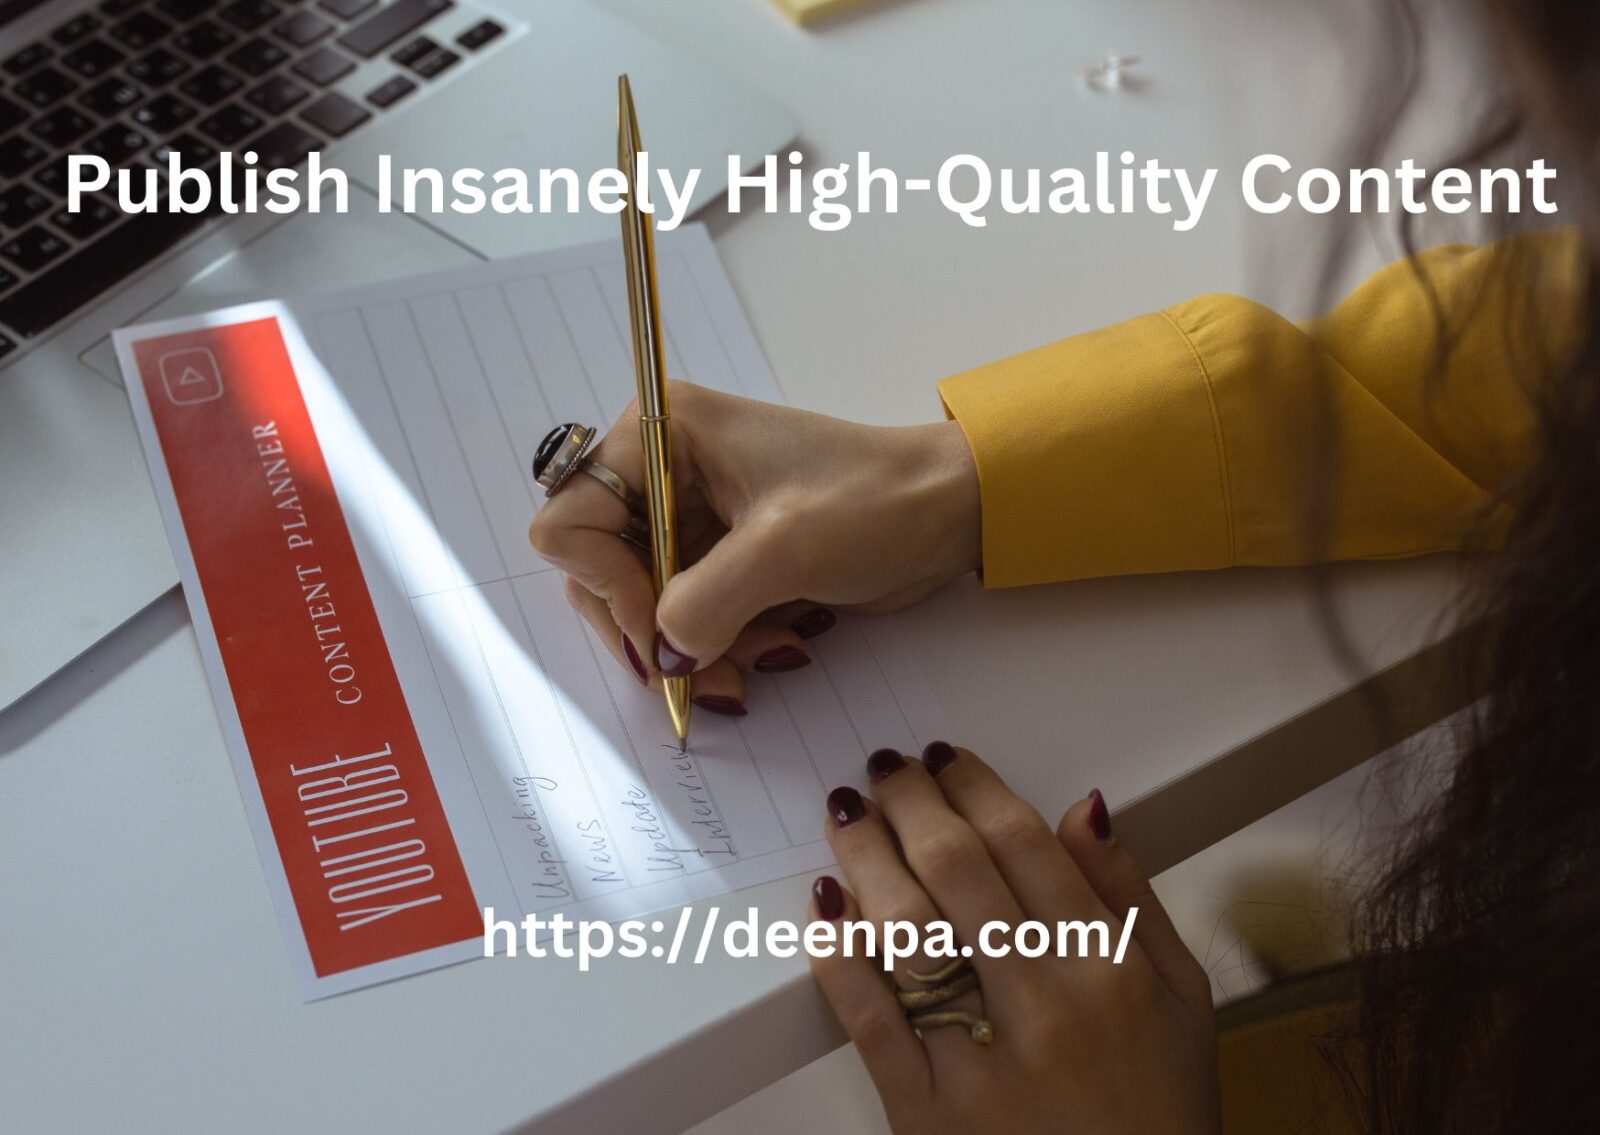 Publish Insanely High-Quality Content